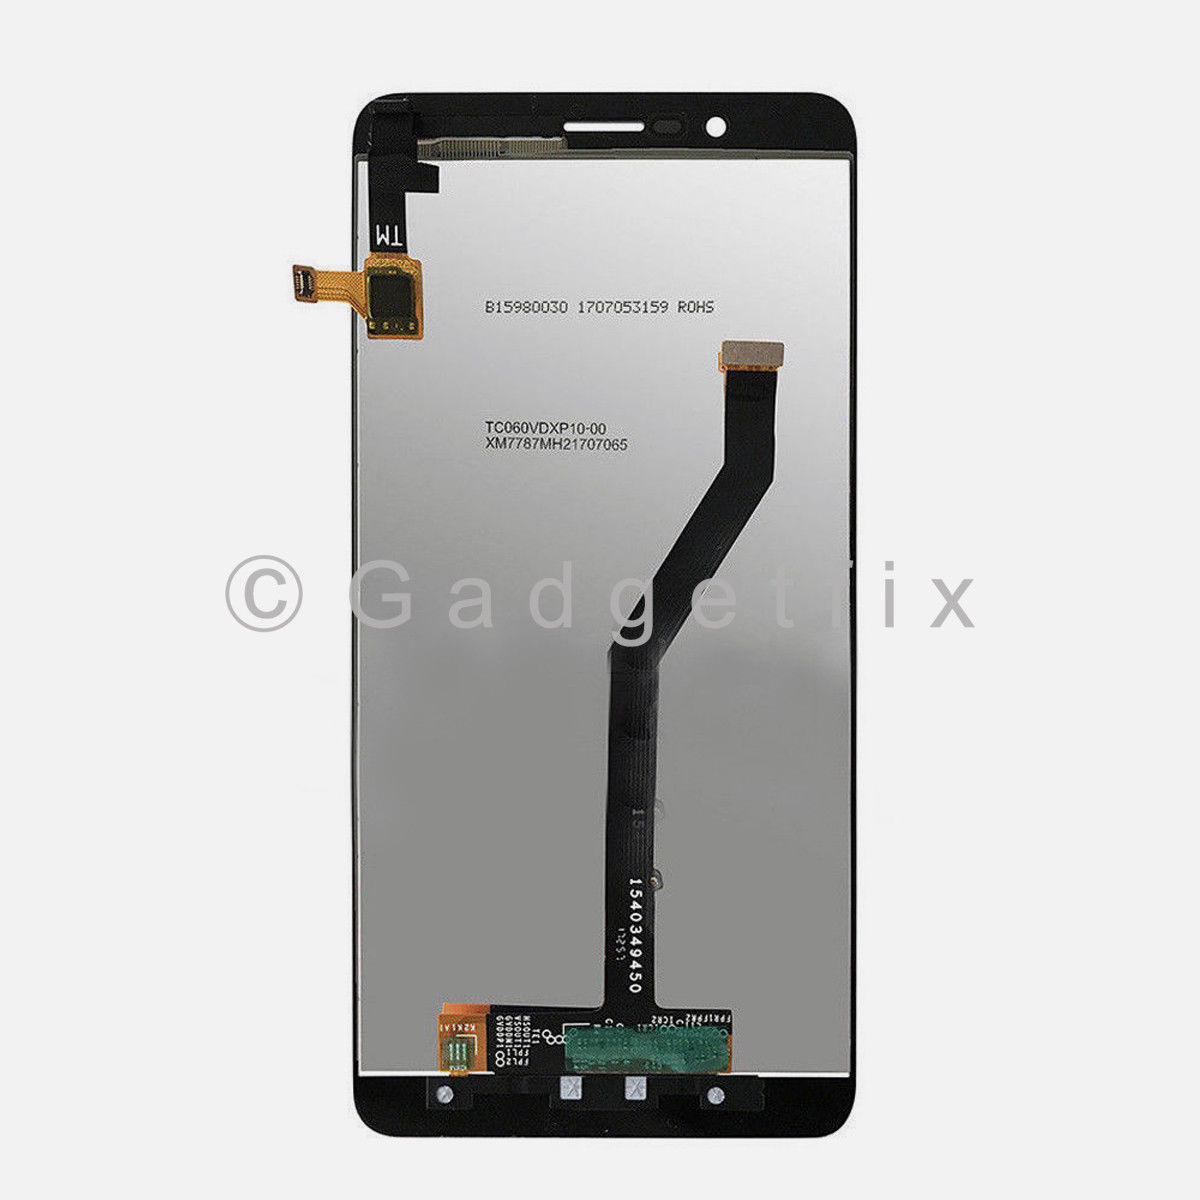 Display LCD Screen Touch Screen Digitizer Replacement For ZTE Blade Z Max Z982 